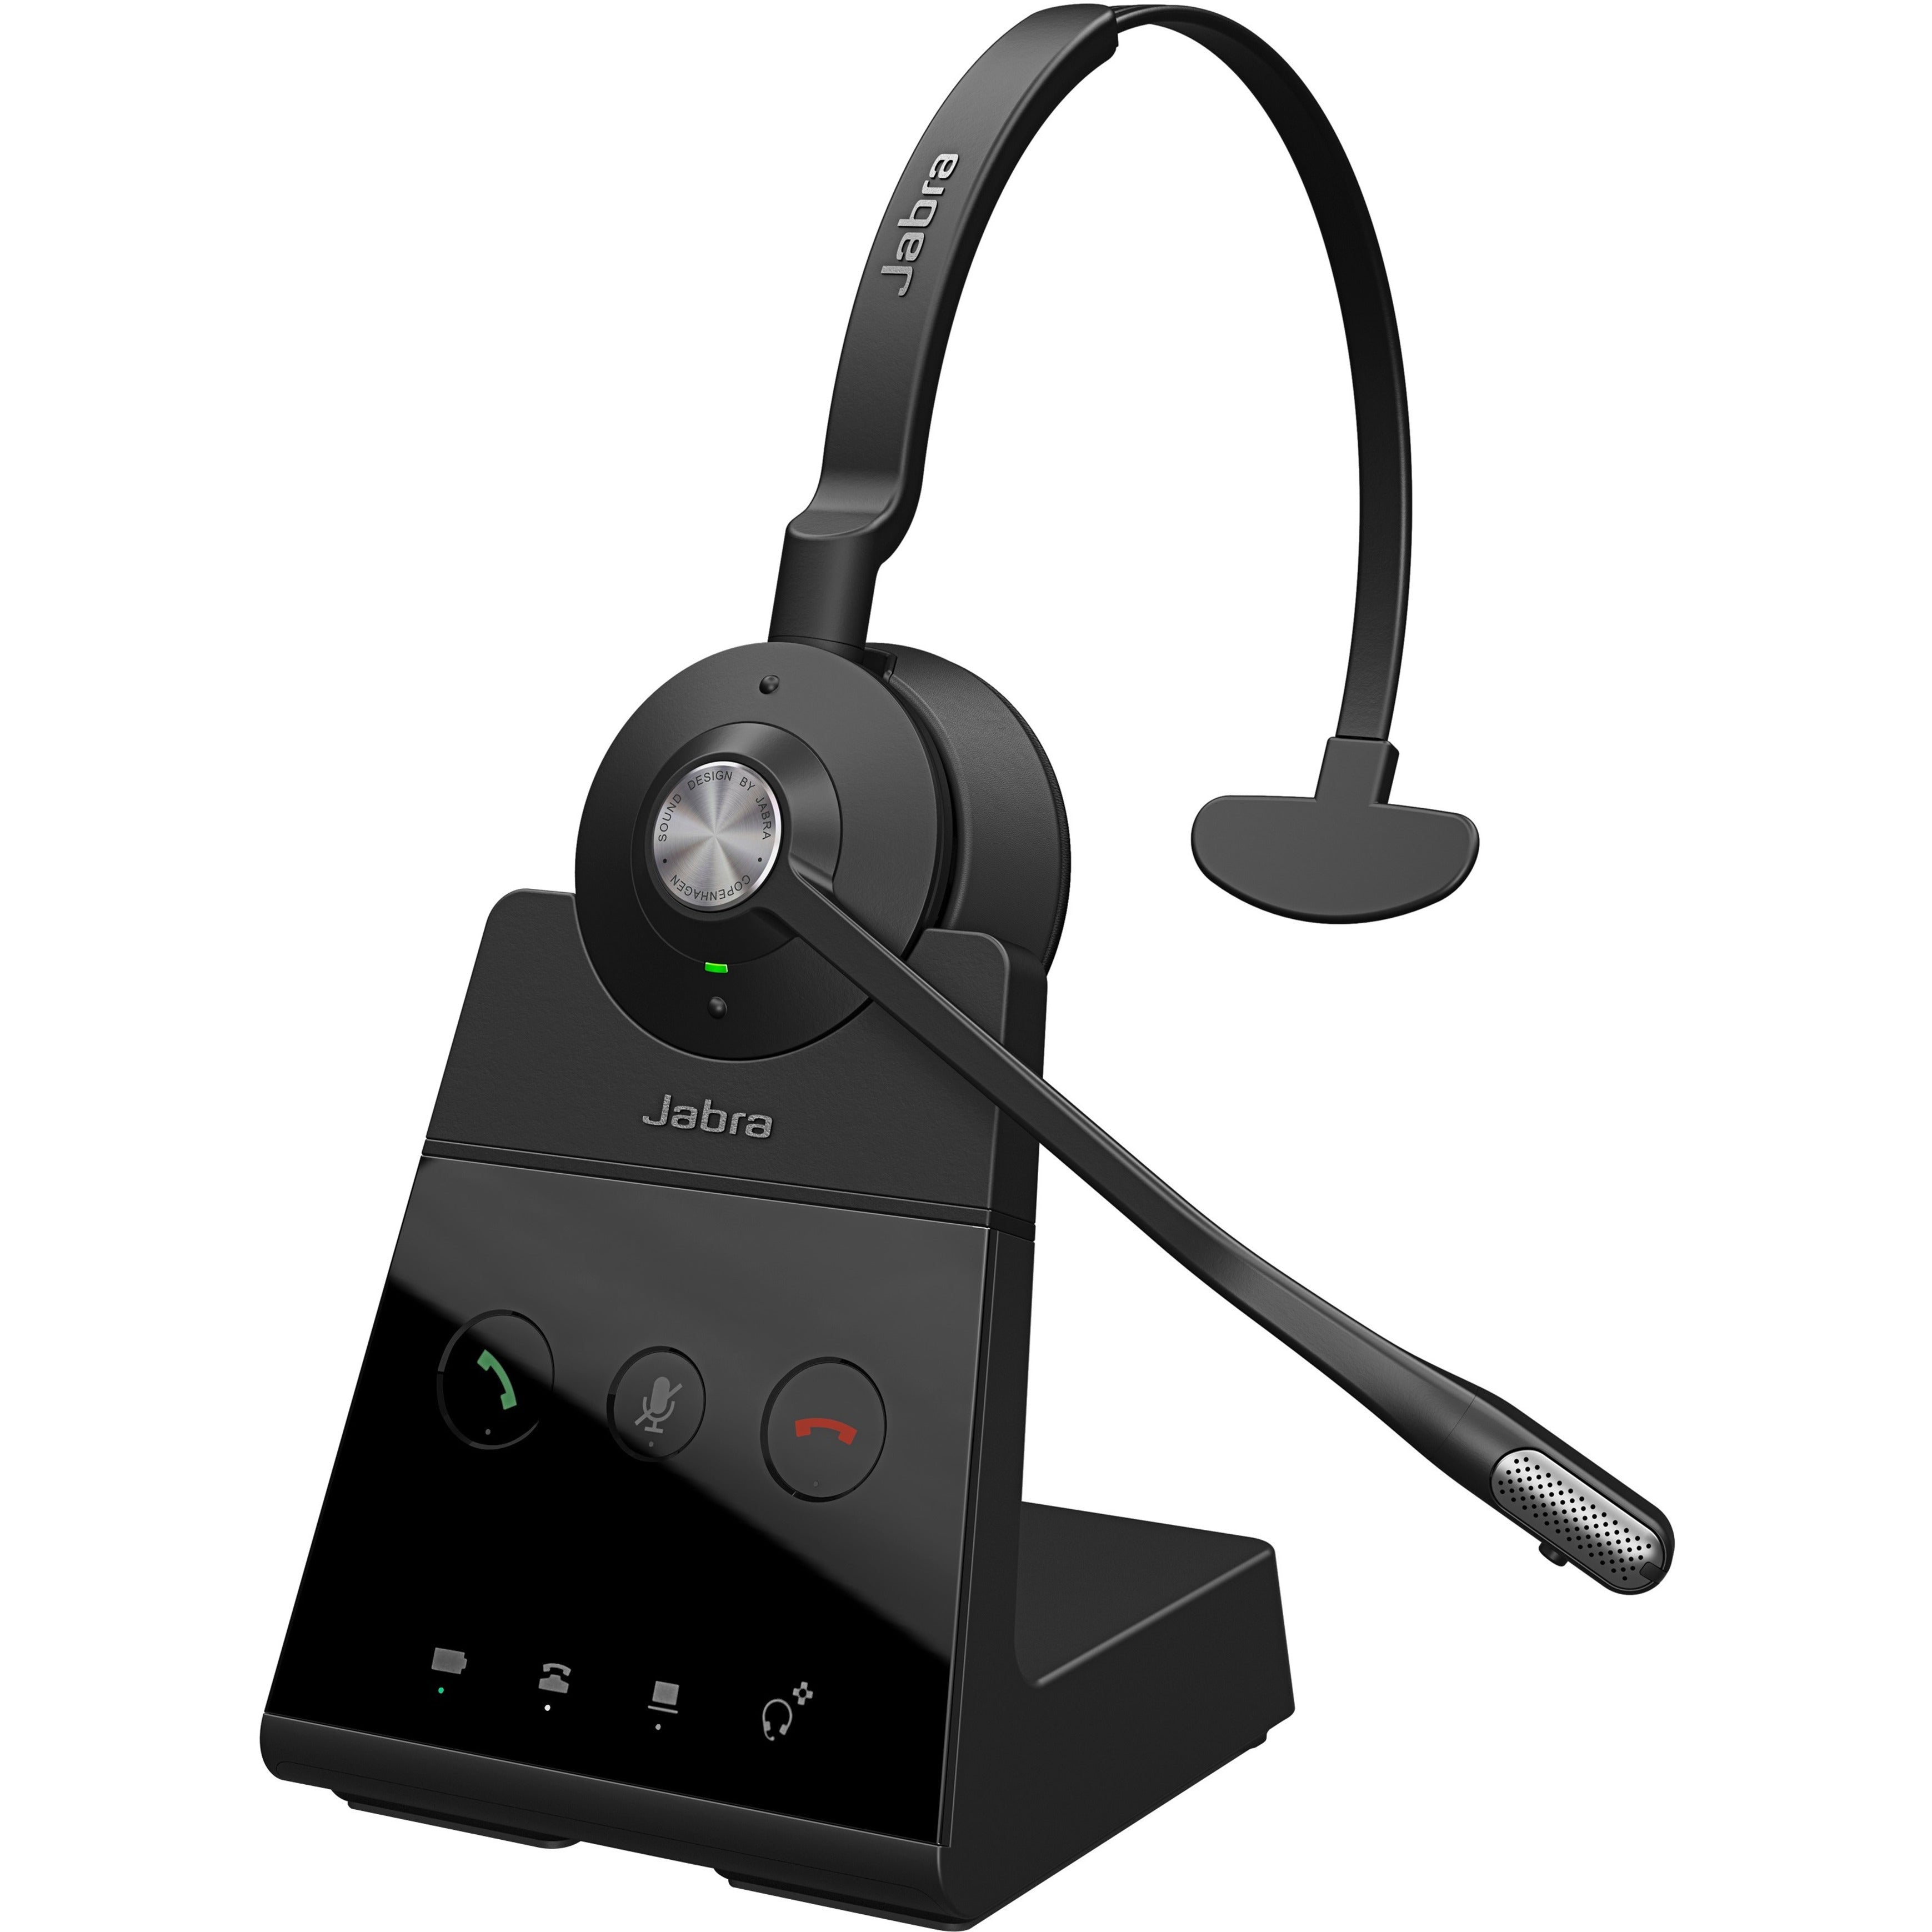 Jabra 9553-553-125 Engage 65 Mono Headset, Wireless DECT Technology, Over-the-head Design